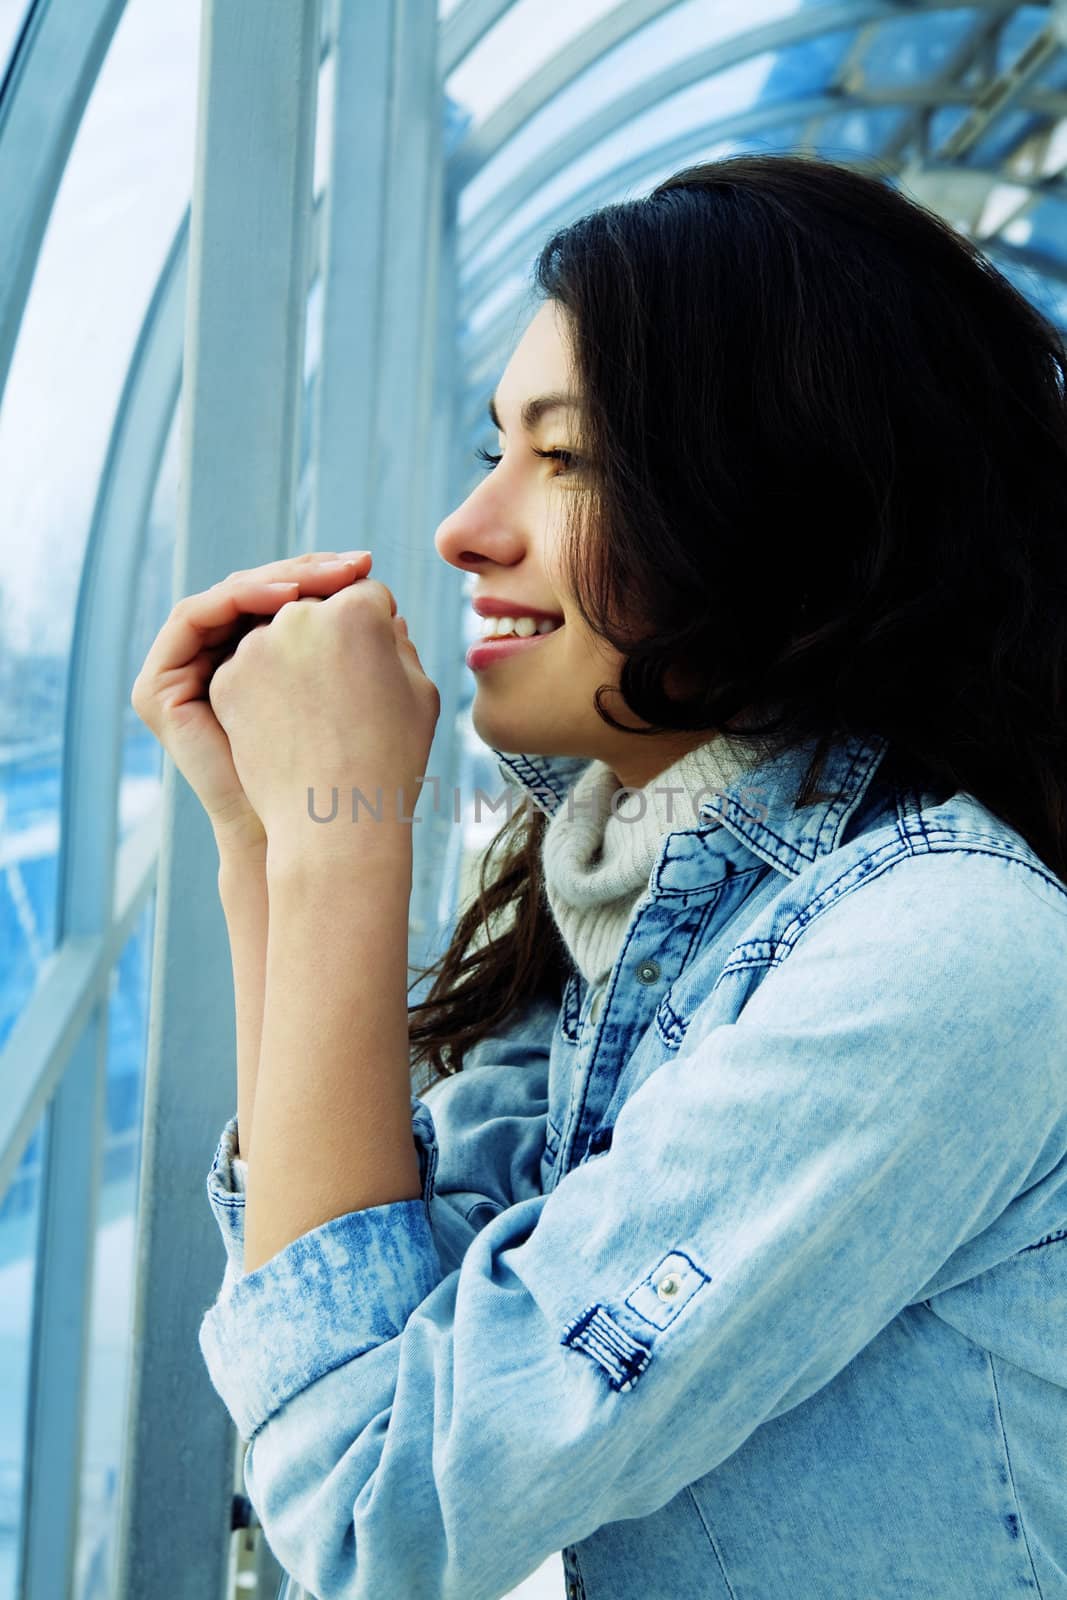 attractive girl in a denim jacket in a modern building against windows by Serp